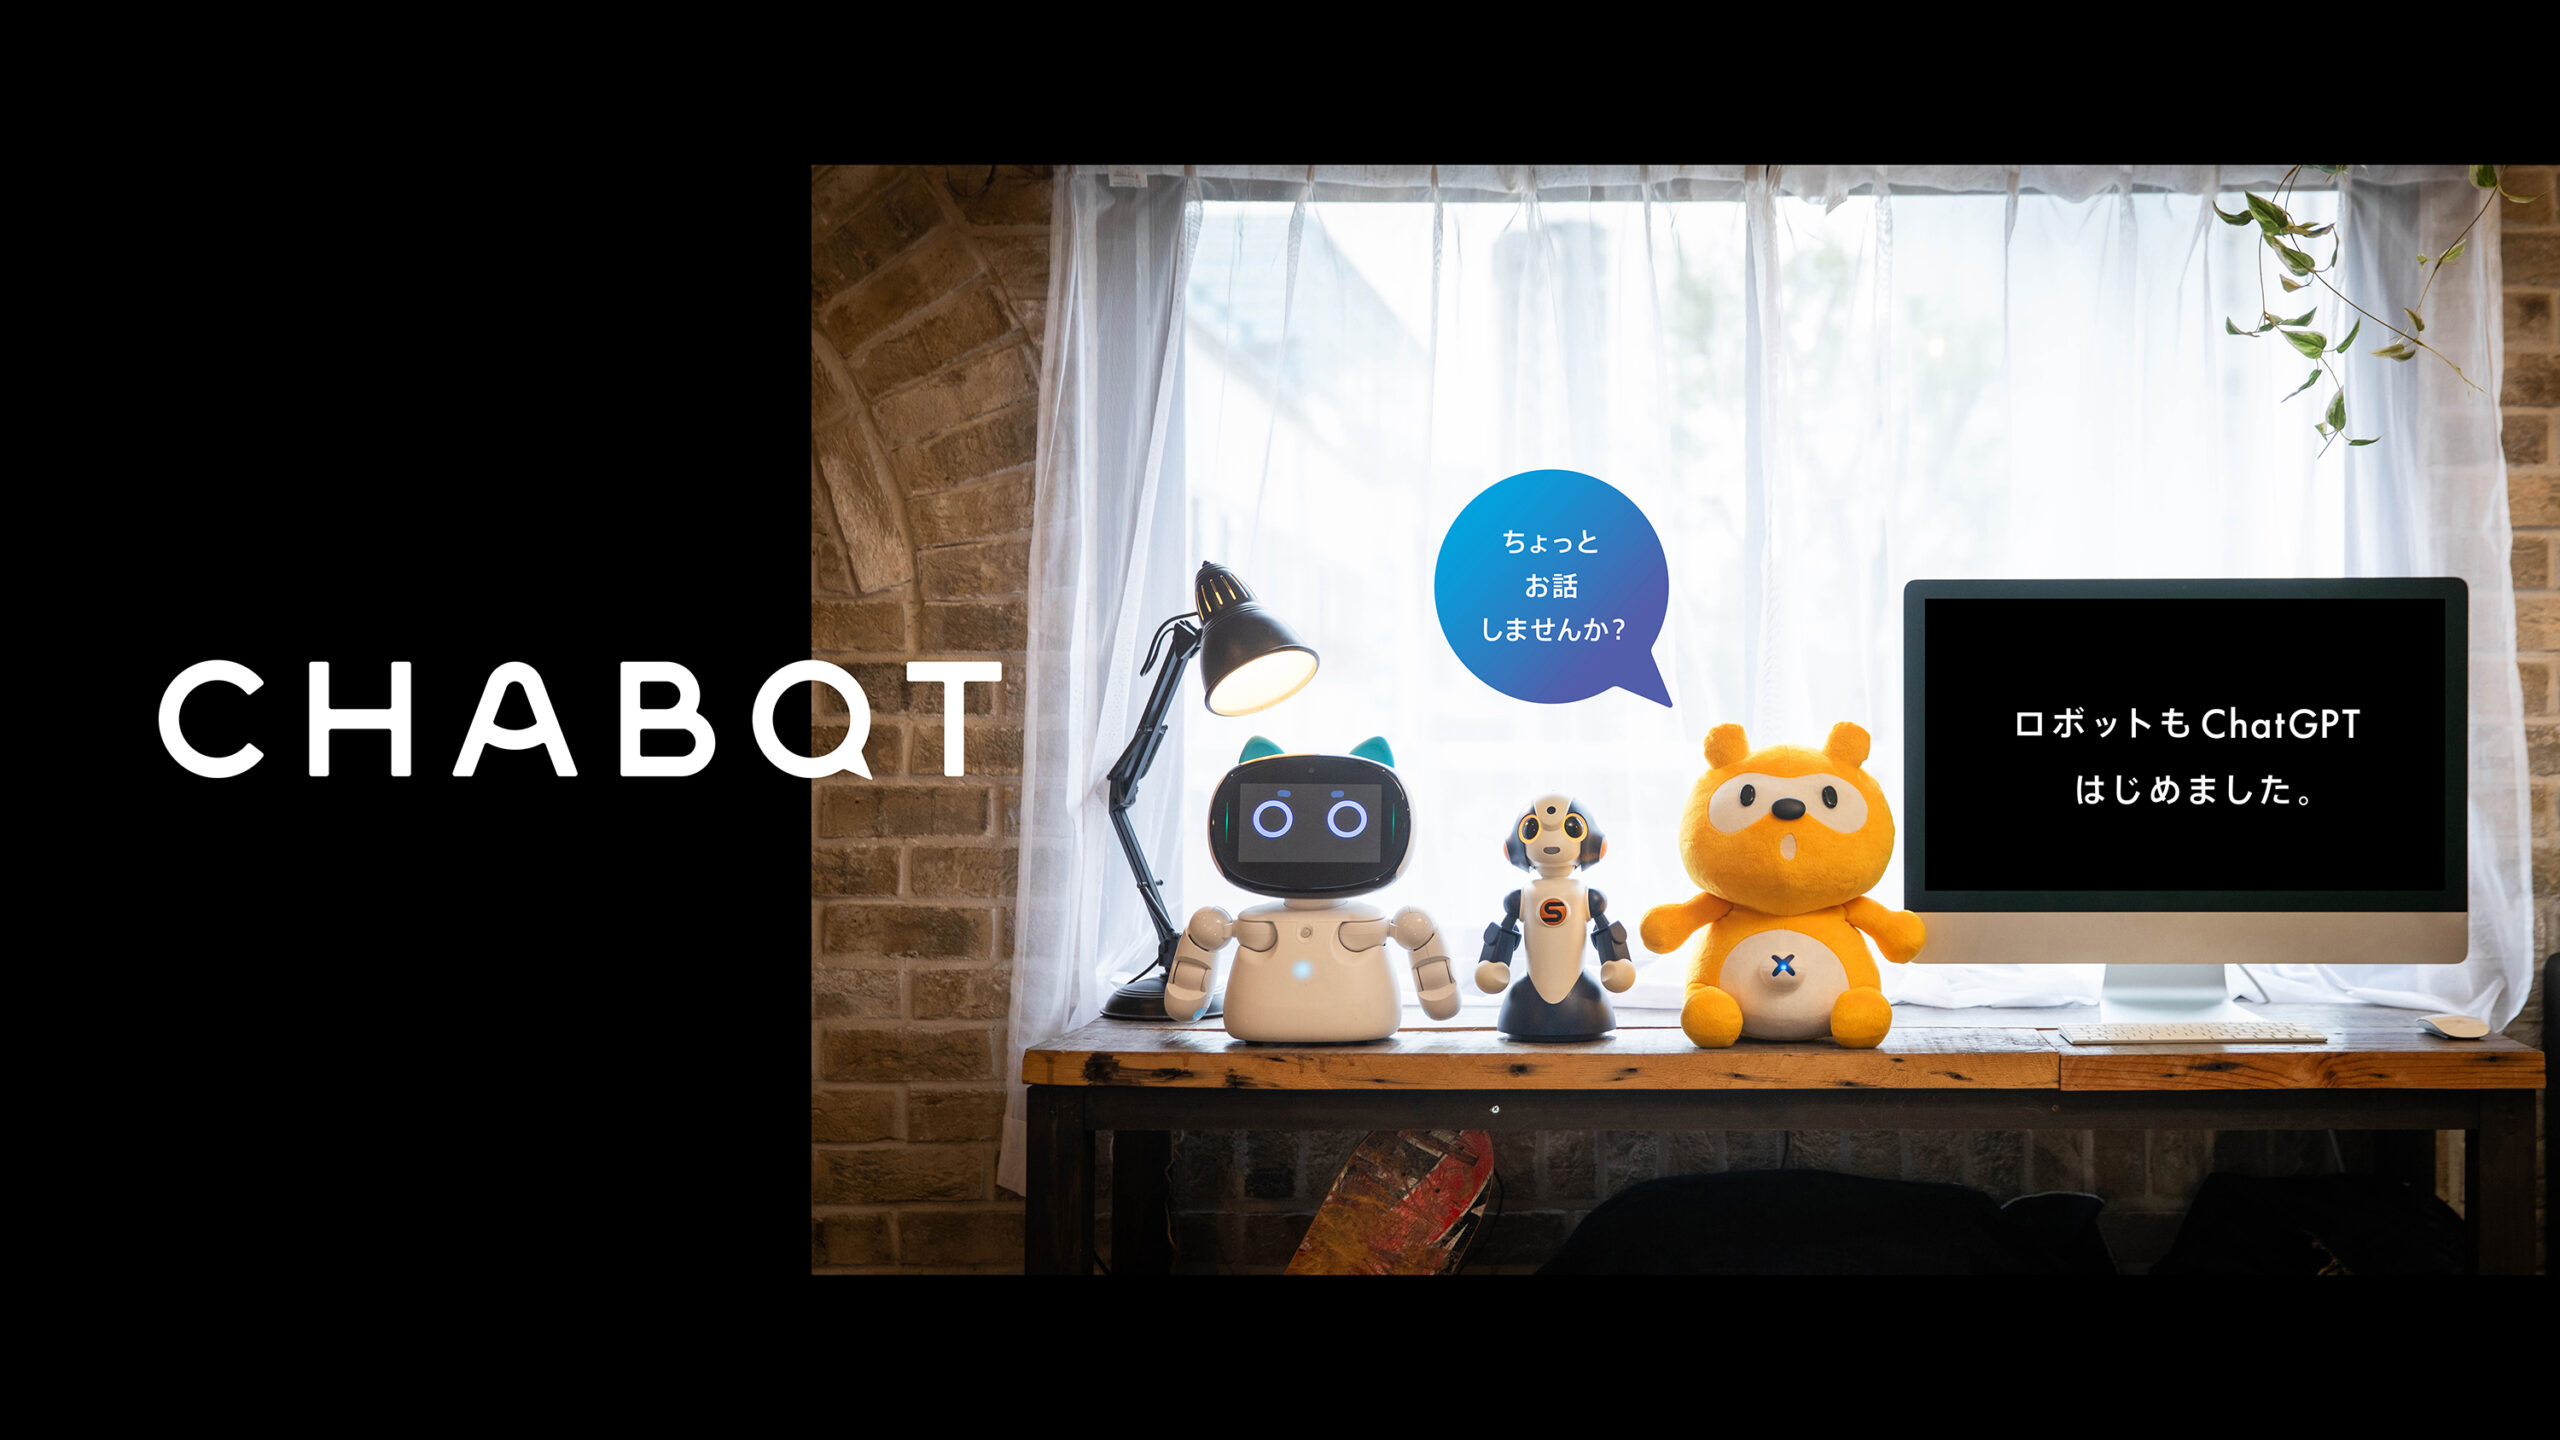 Start the rental and customization service of CHABOT, a robot using ChatGPT.